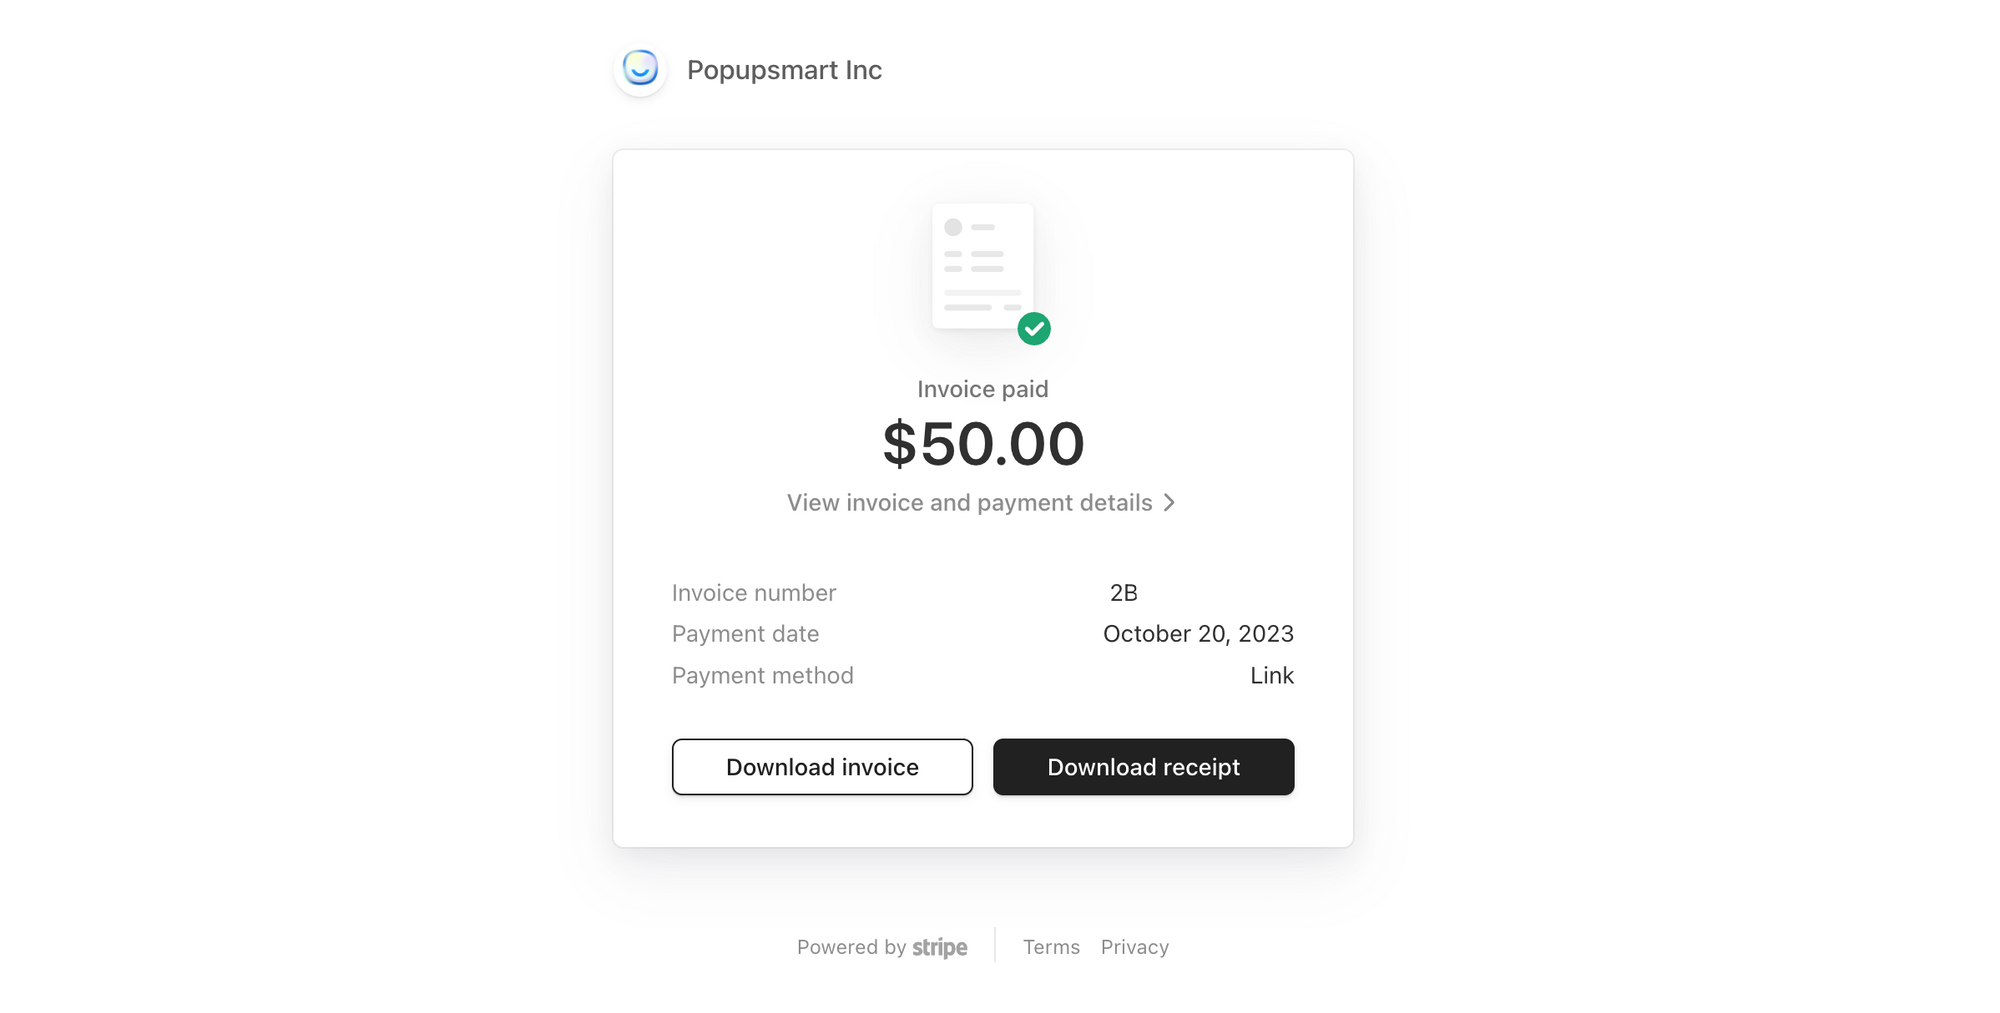 stripe download receipt or invoice page for obtaining the purchase info of LiveChatAI account